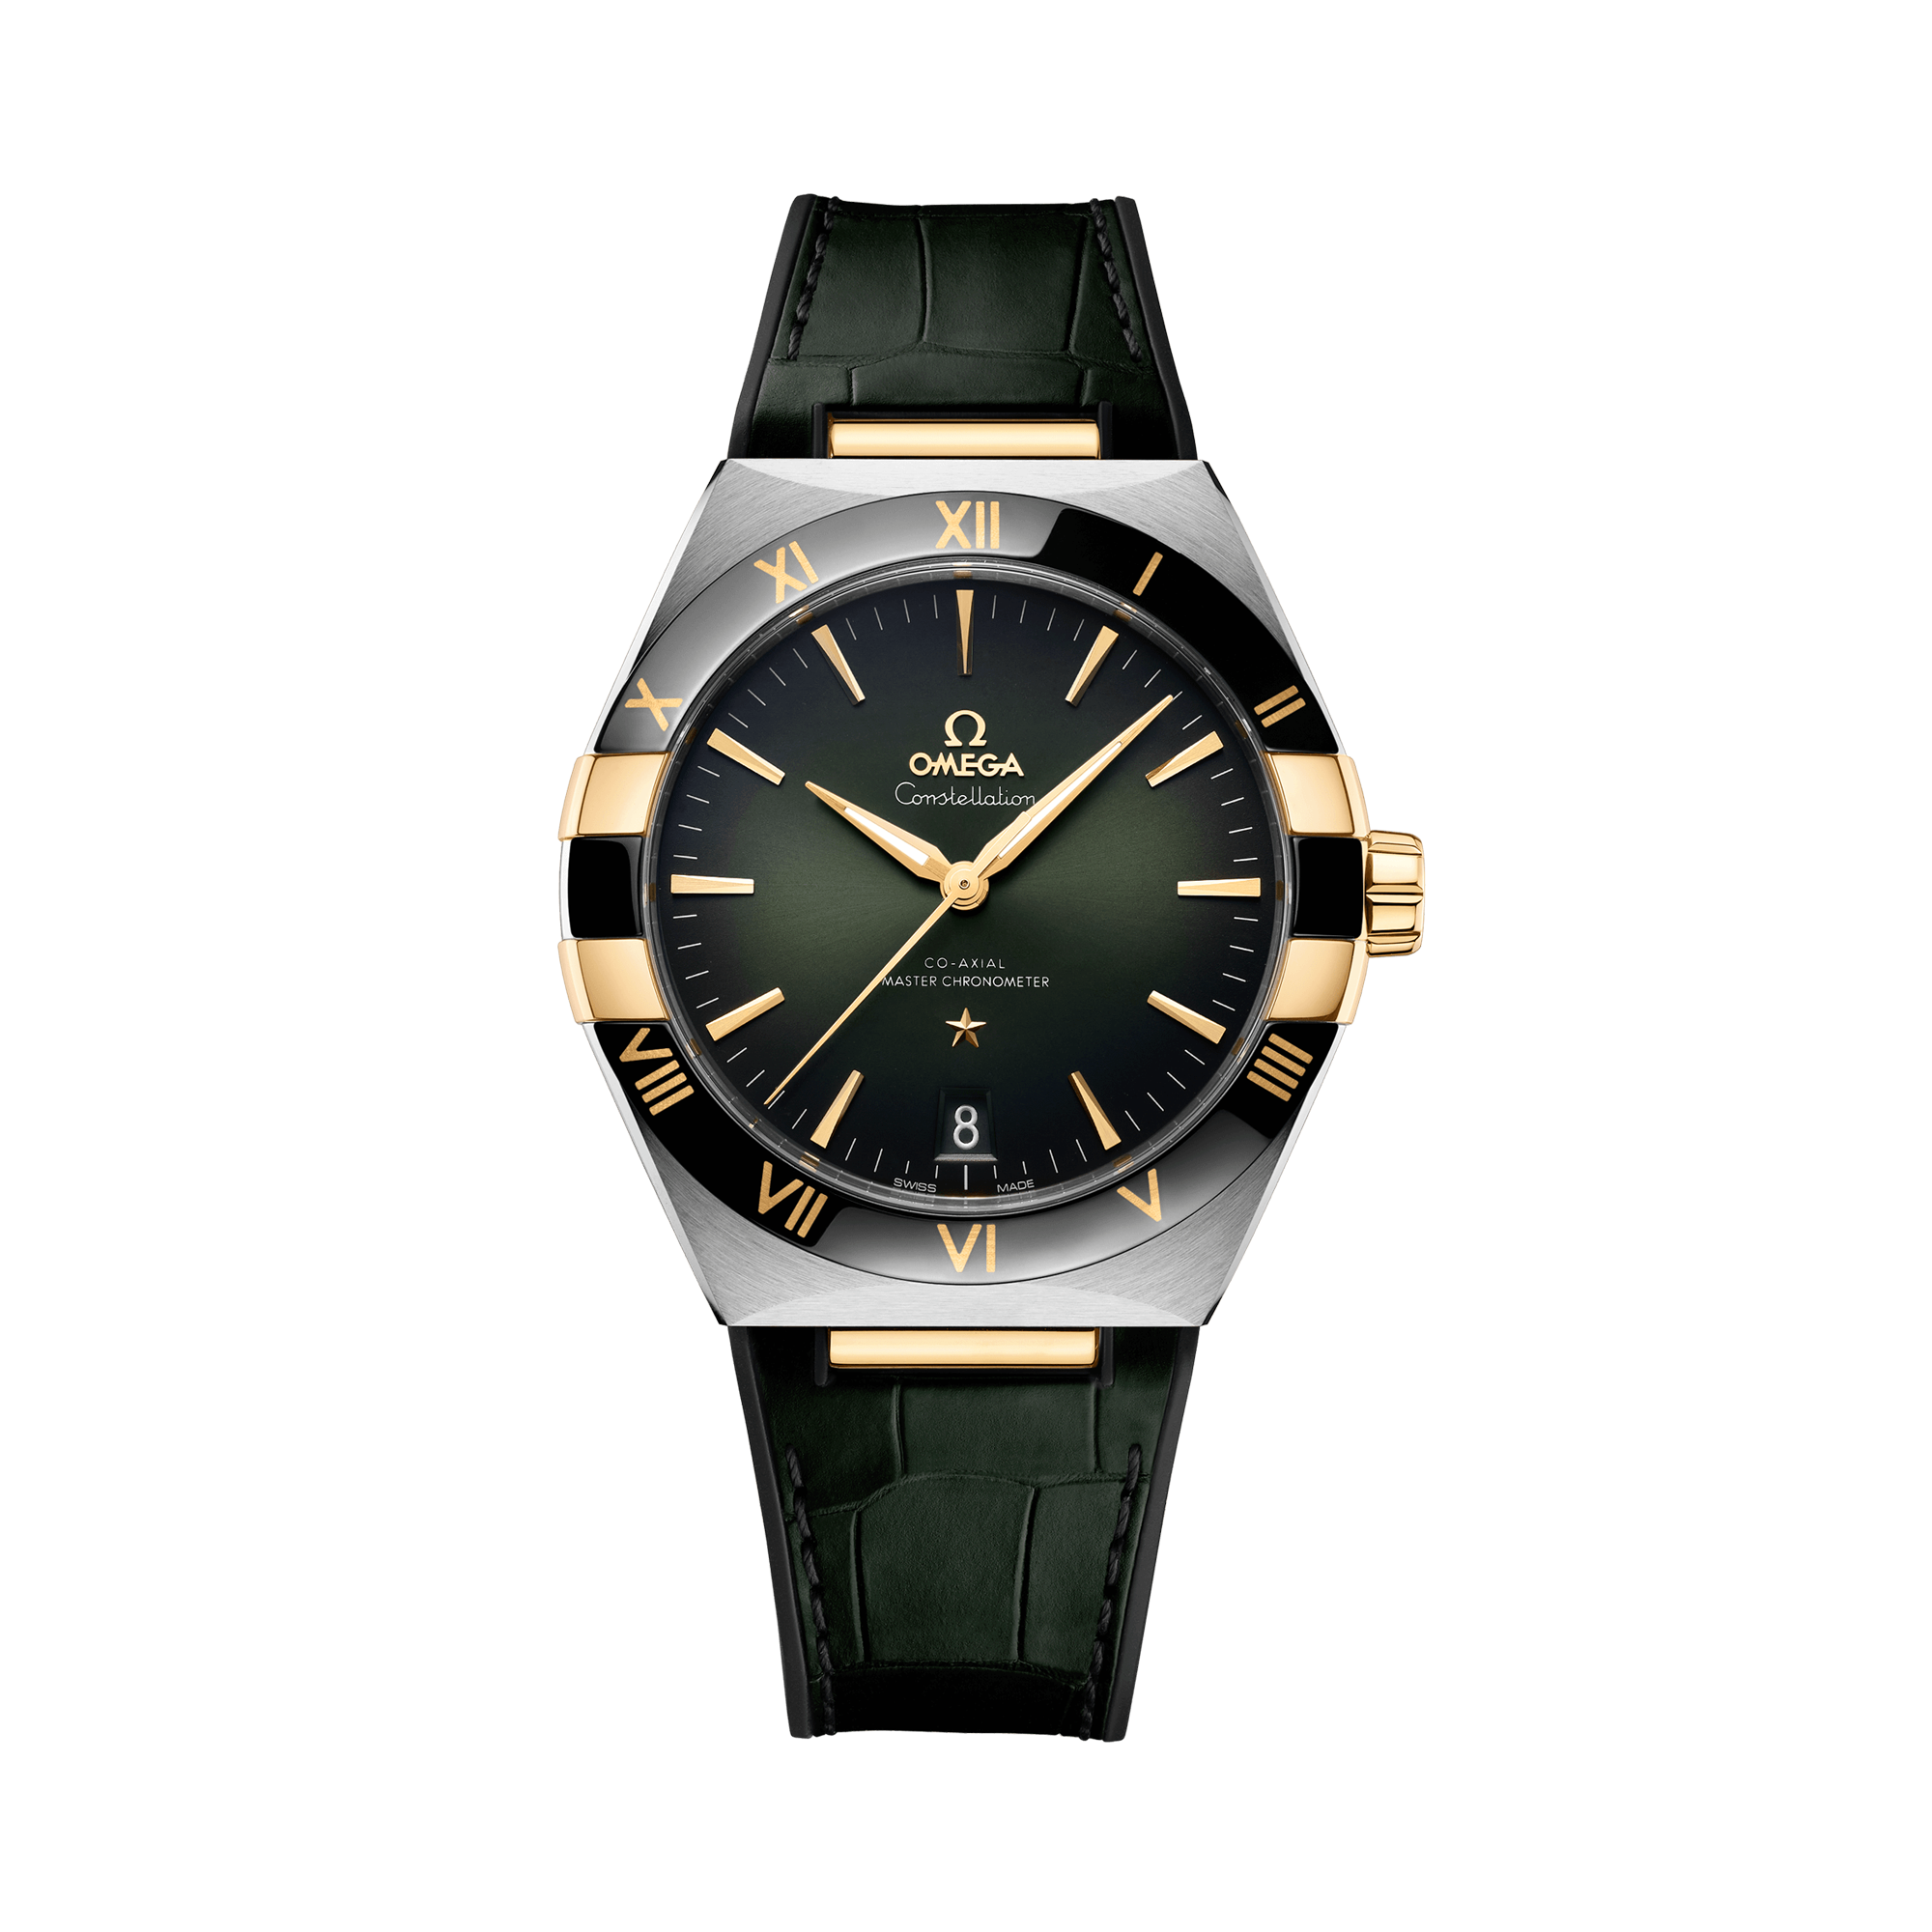 OMEGA Constellation 41mm, Green Dial, Baton Numerals_1